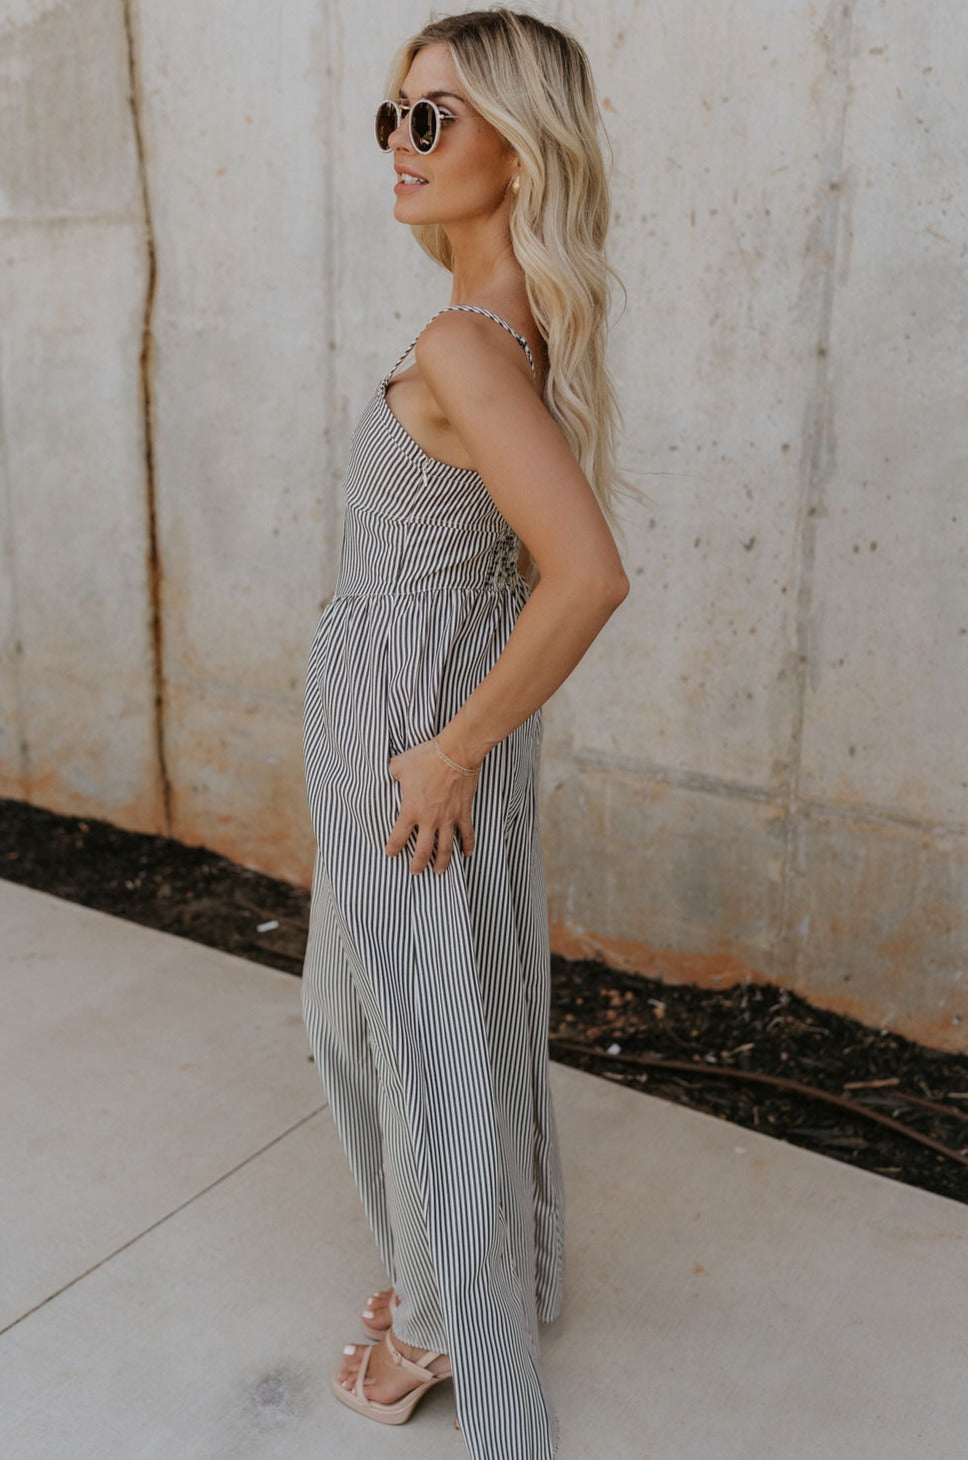 side view of female model wearing the Palmer Black & Cream Stripe Sleeveless Jumpsuit which features Black and Cream Linen Stripe Pattern, Wide Pant Legs, Side Pockets, Sweetheart Neckline, Side Zipper, Adjustable Straps and Smocked Back